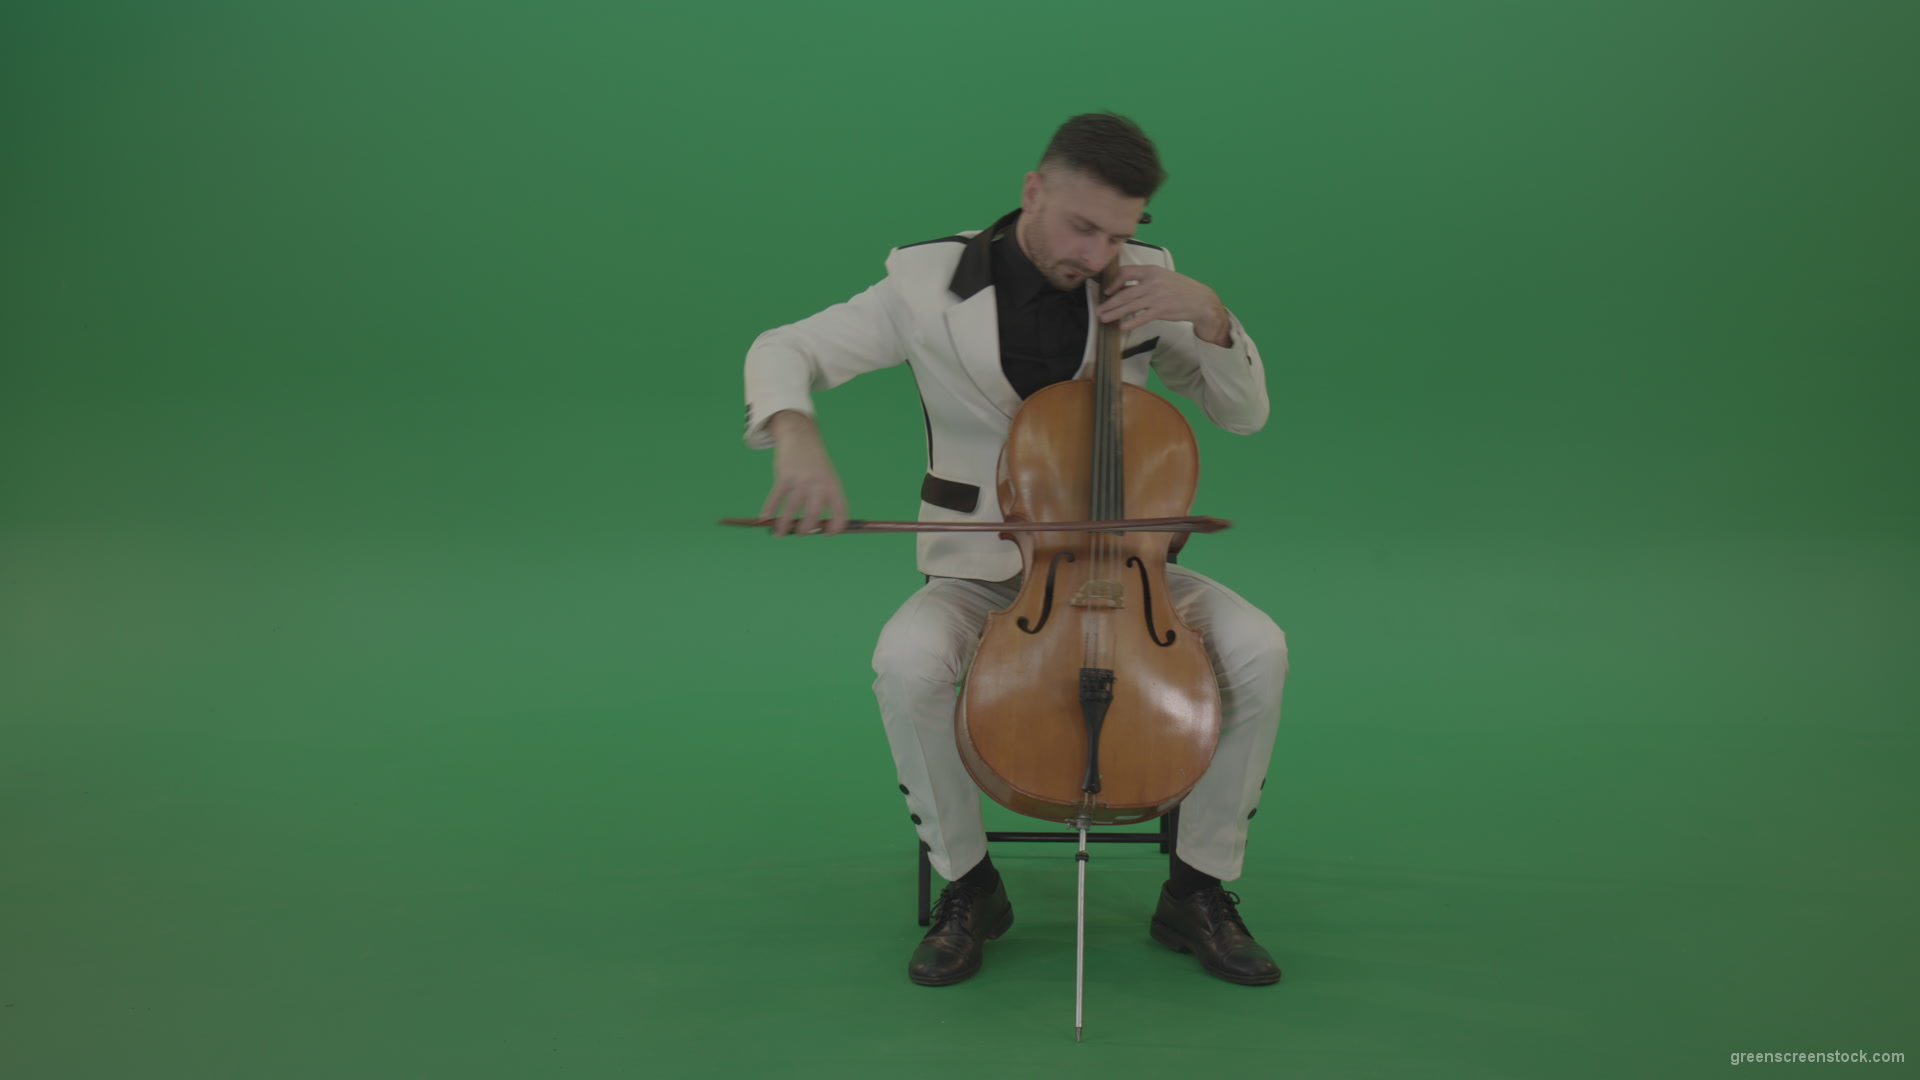 Classic-orchestra-man-in-white-wear-play-violoncello-cello-strings-music-instrument-isolated-on-green-screen_008 Green Screen Stock